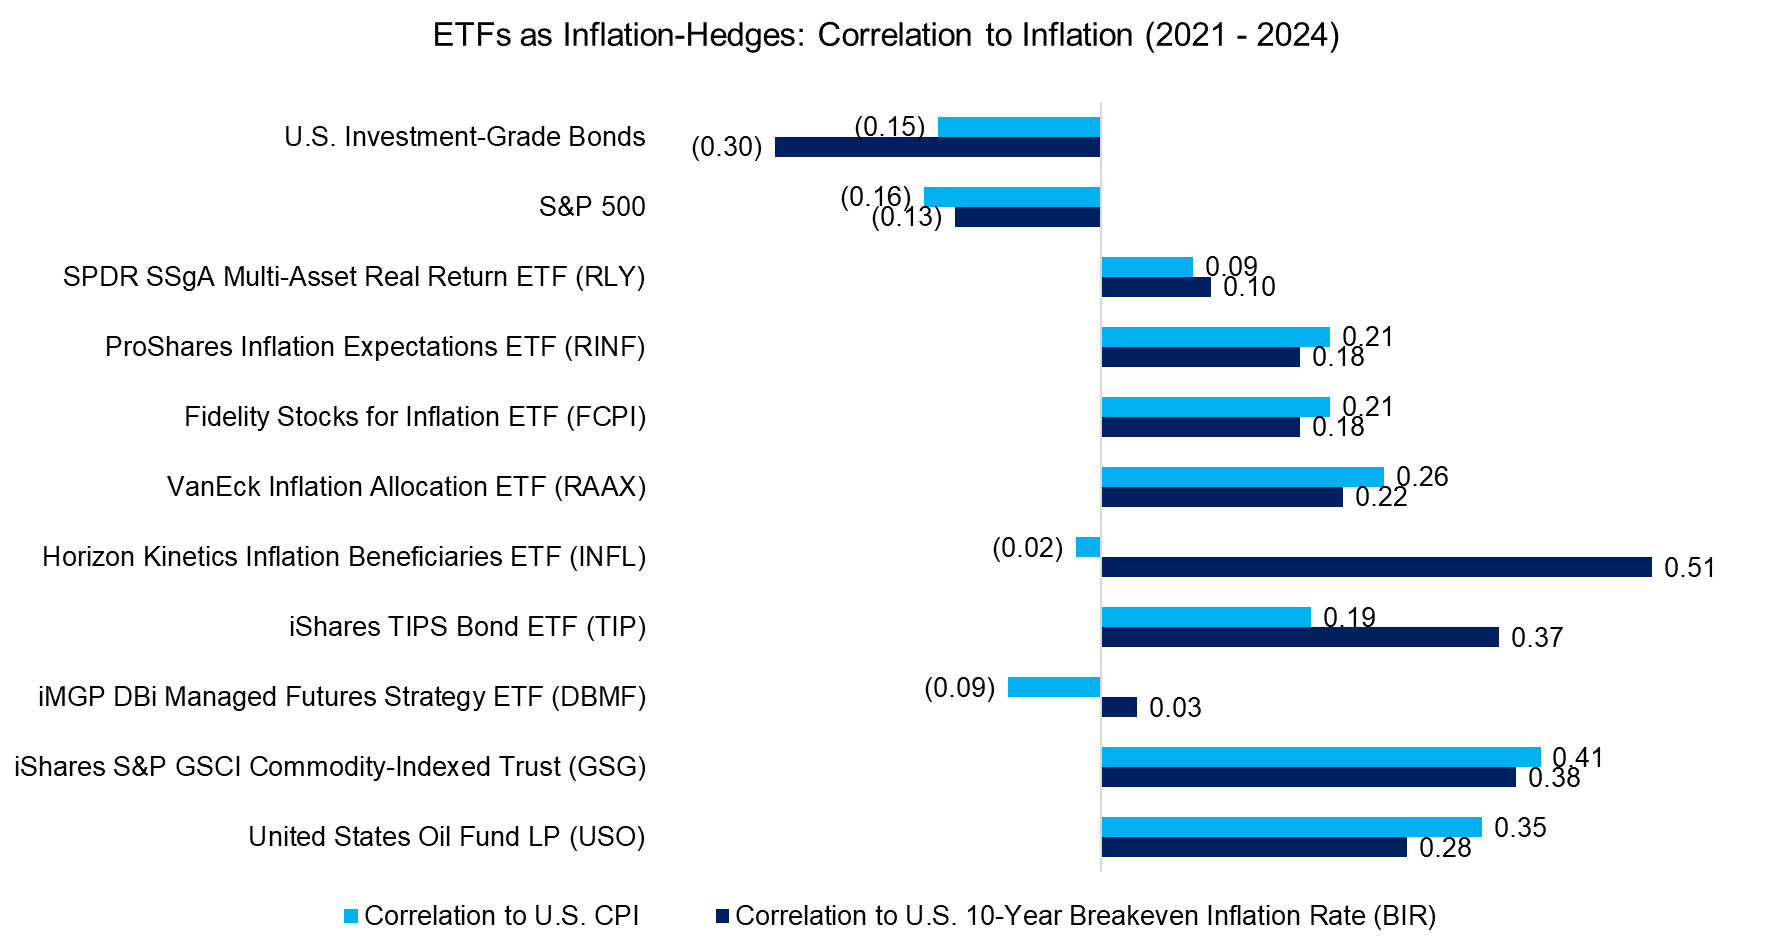 ETFs as Inflation-Hedges Correlation to Inflation (2021 - 2024)